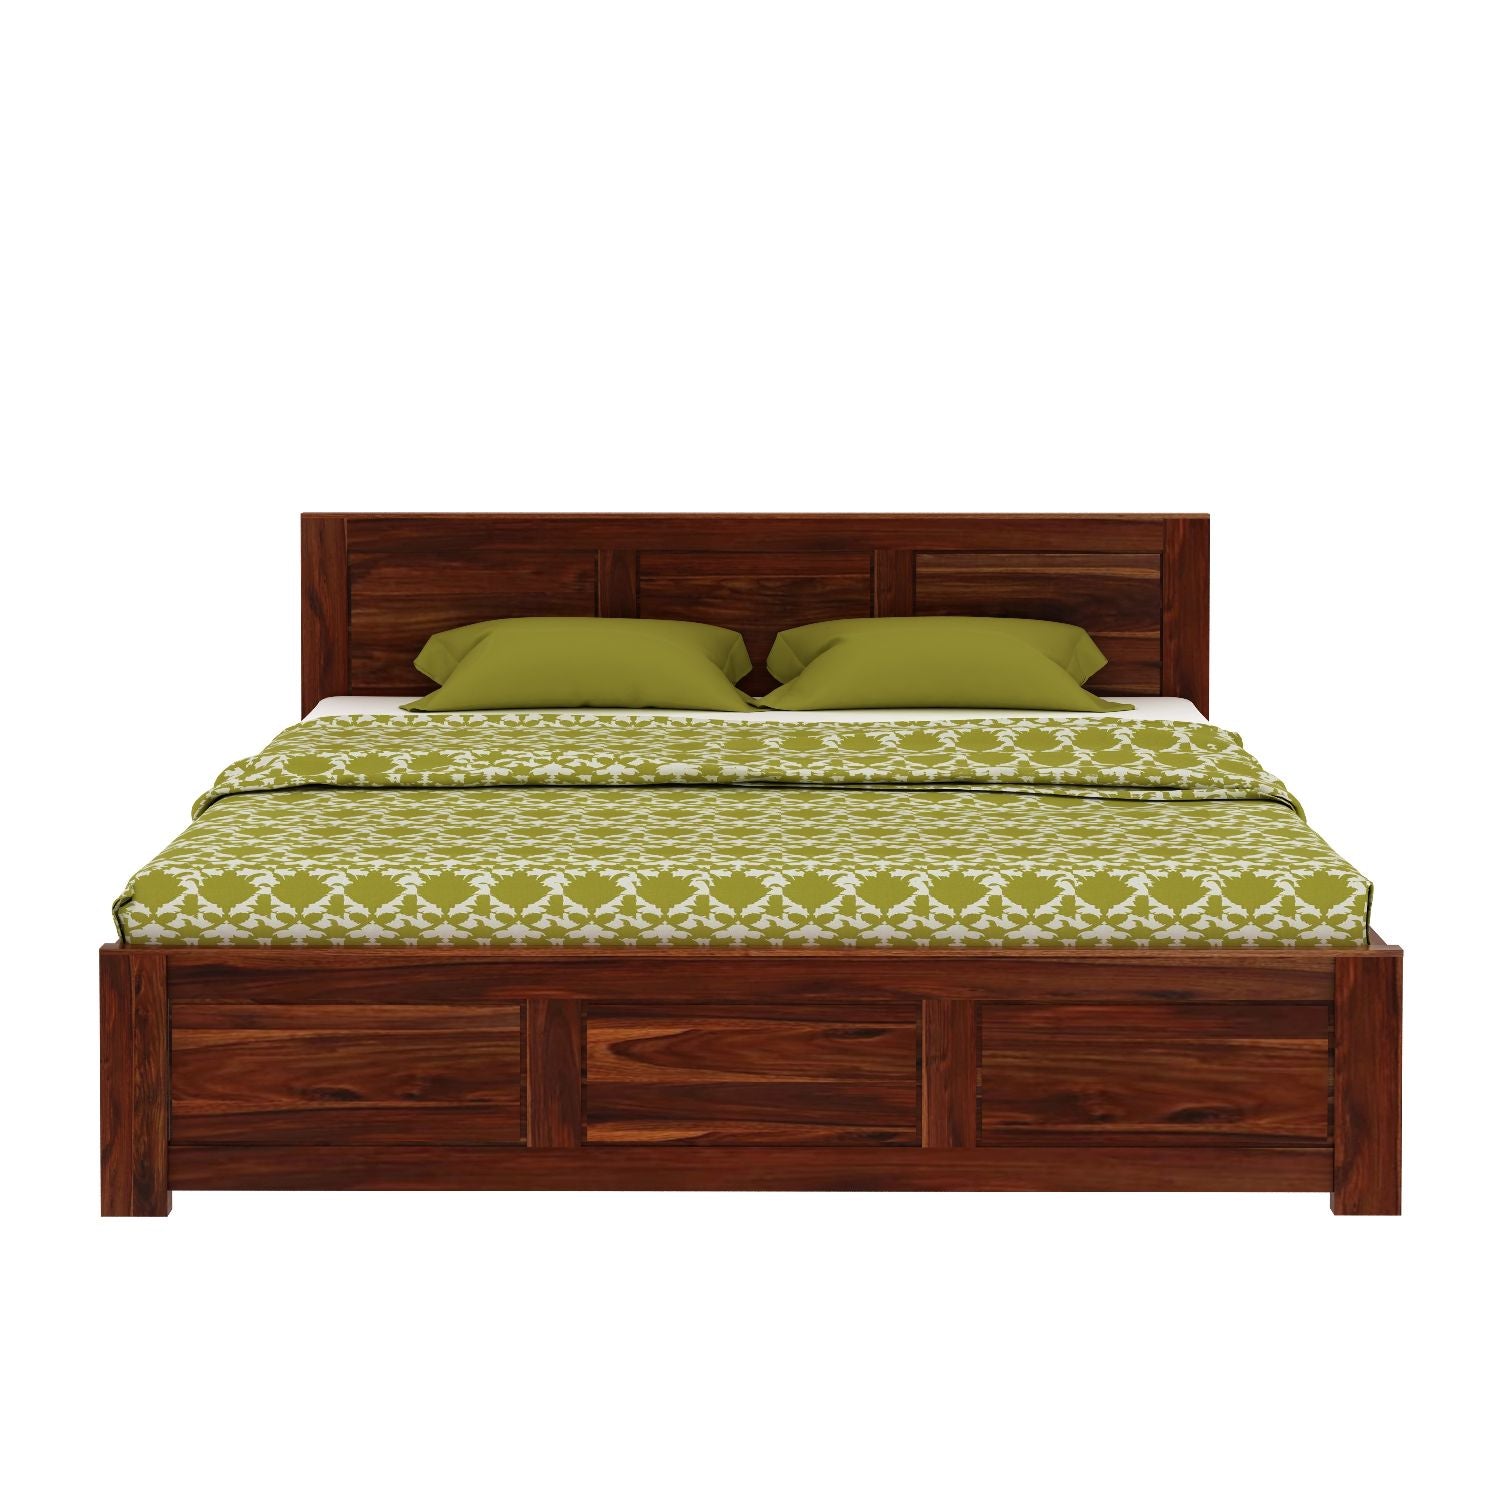 Woodwing Solid Sheesham Wood Hydraulic Bed With Box Storage (King Size, Natural Finish)